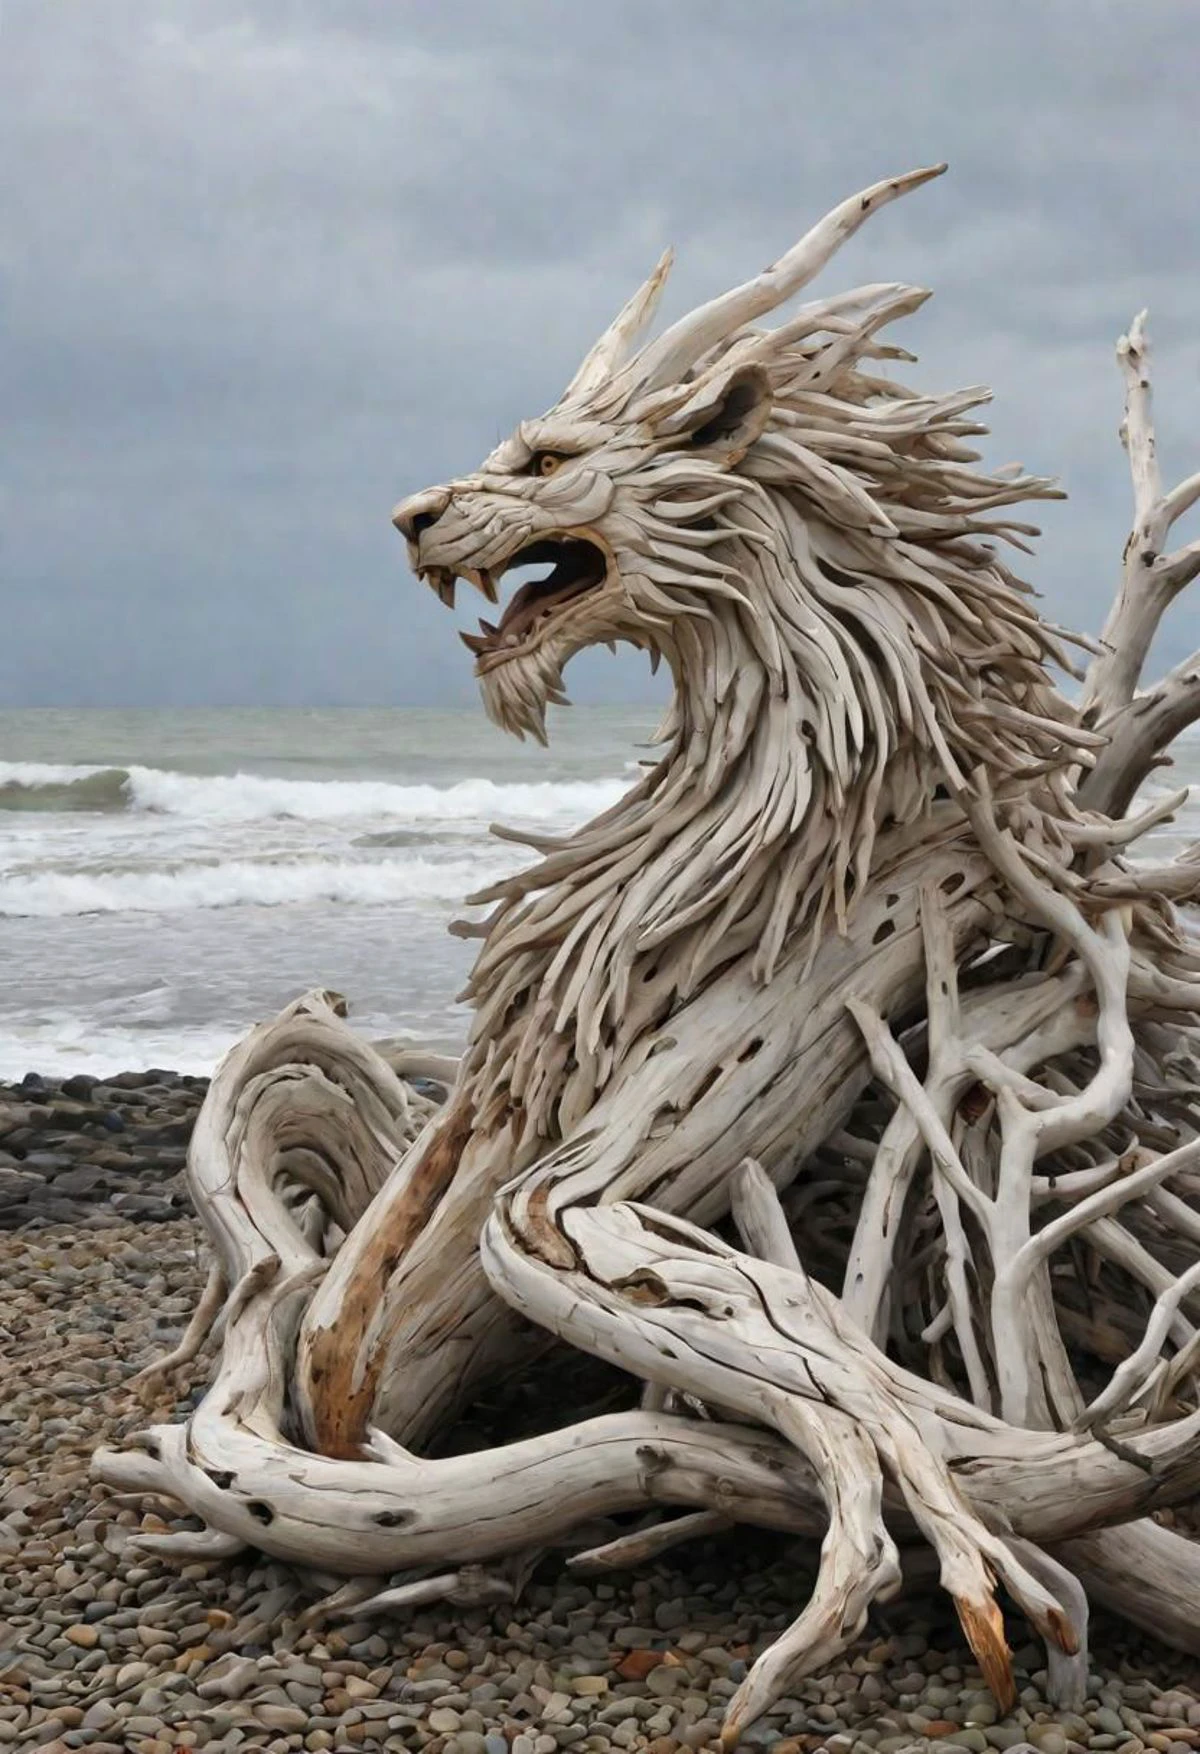 quite ((cahotic)) sculture made of drift wood irregular branches and a few trunks composing all together an overall shape similar to an undefined ((lion)) (((like dragon of Vaia))), some wood pieces are quite bleached by the sun and salted sea, on a rock on the shore, (((birds in the background))), at the evening, storming sea and leaden sea behind, photorealistic